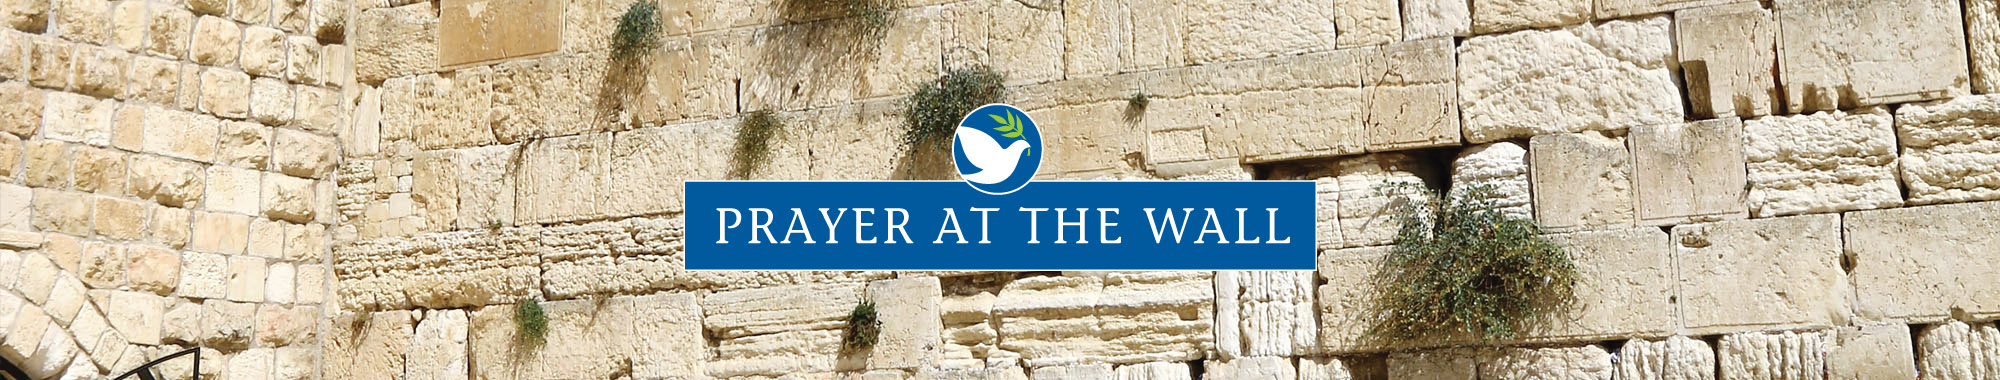 IFCJ prayer at the wall logo against a background of the Western Wall.